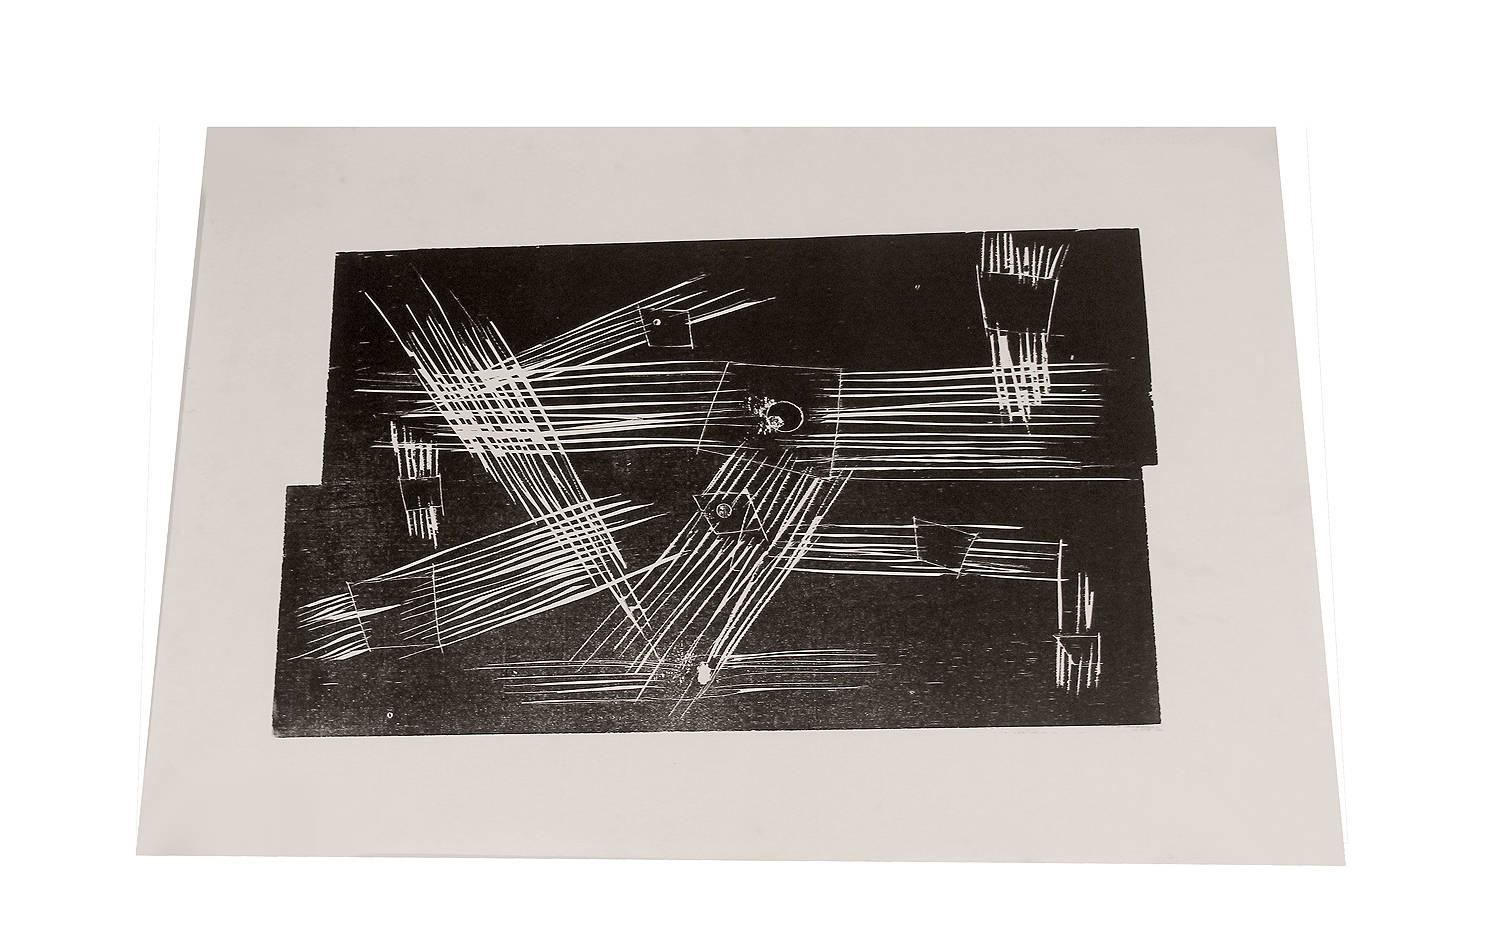 Woodblock abstract lithography on paper by Alwin Carstens (1906-1982), German constructivist Brutalist style, circa 1960s. 

No signature but stamp from estate.